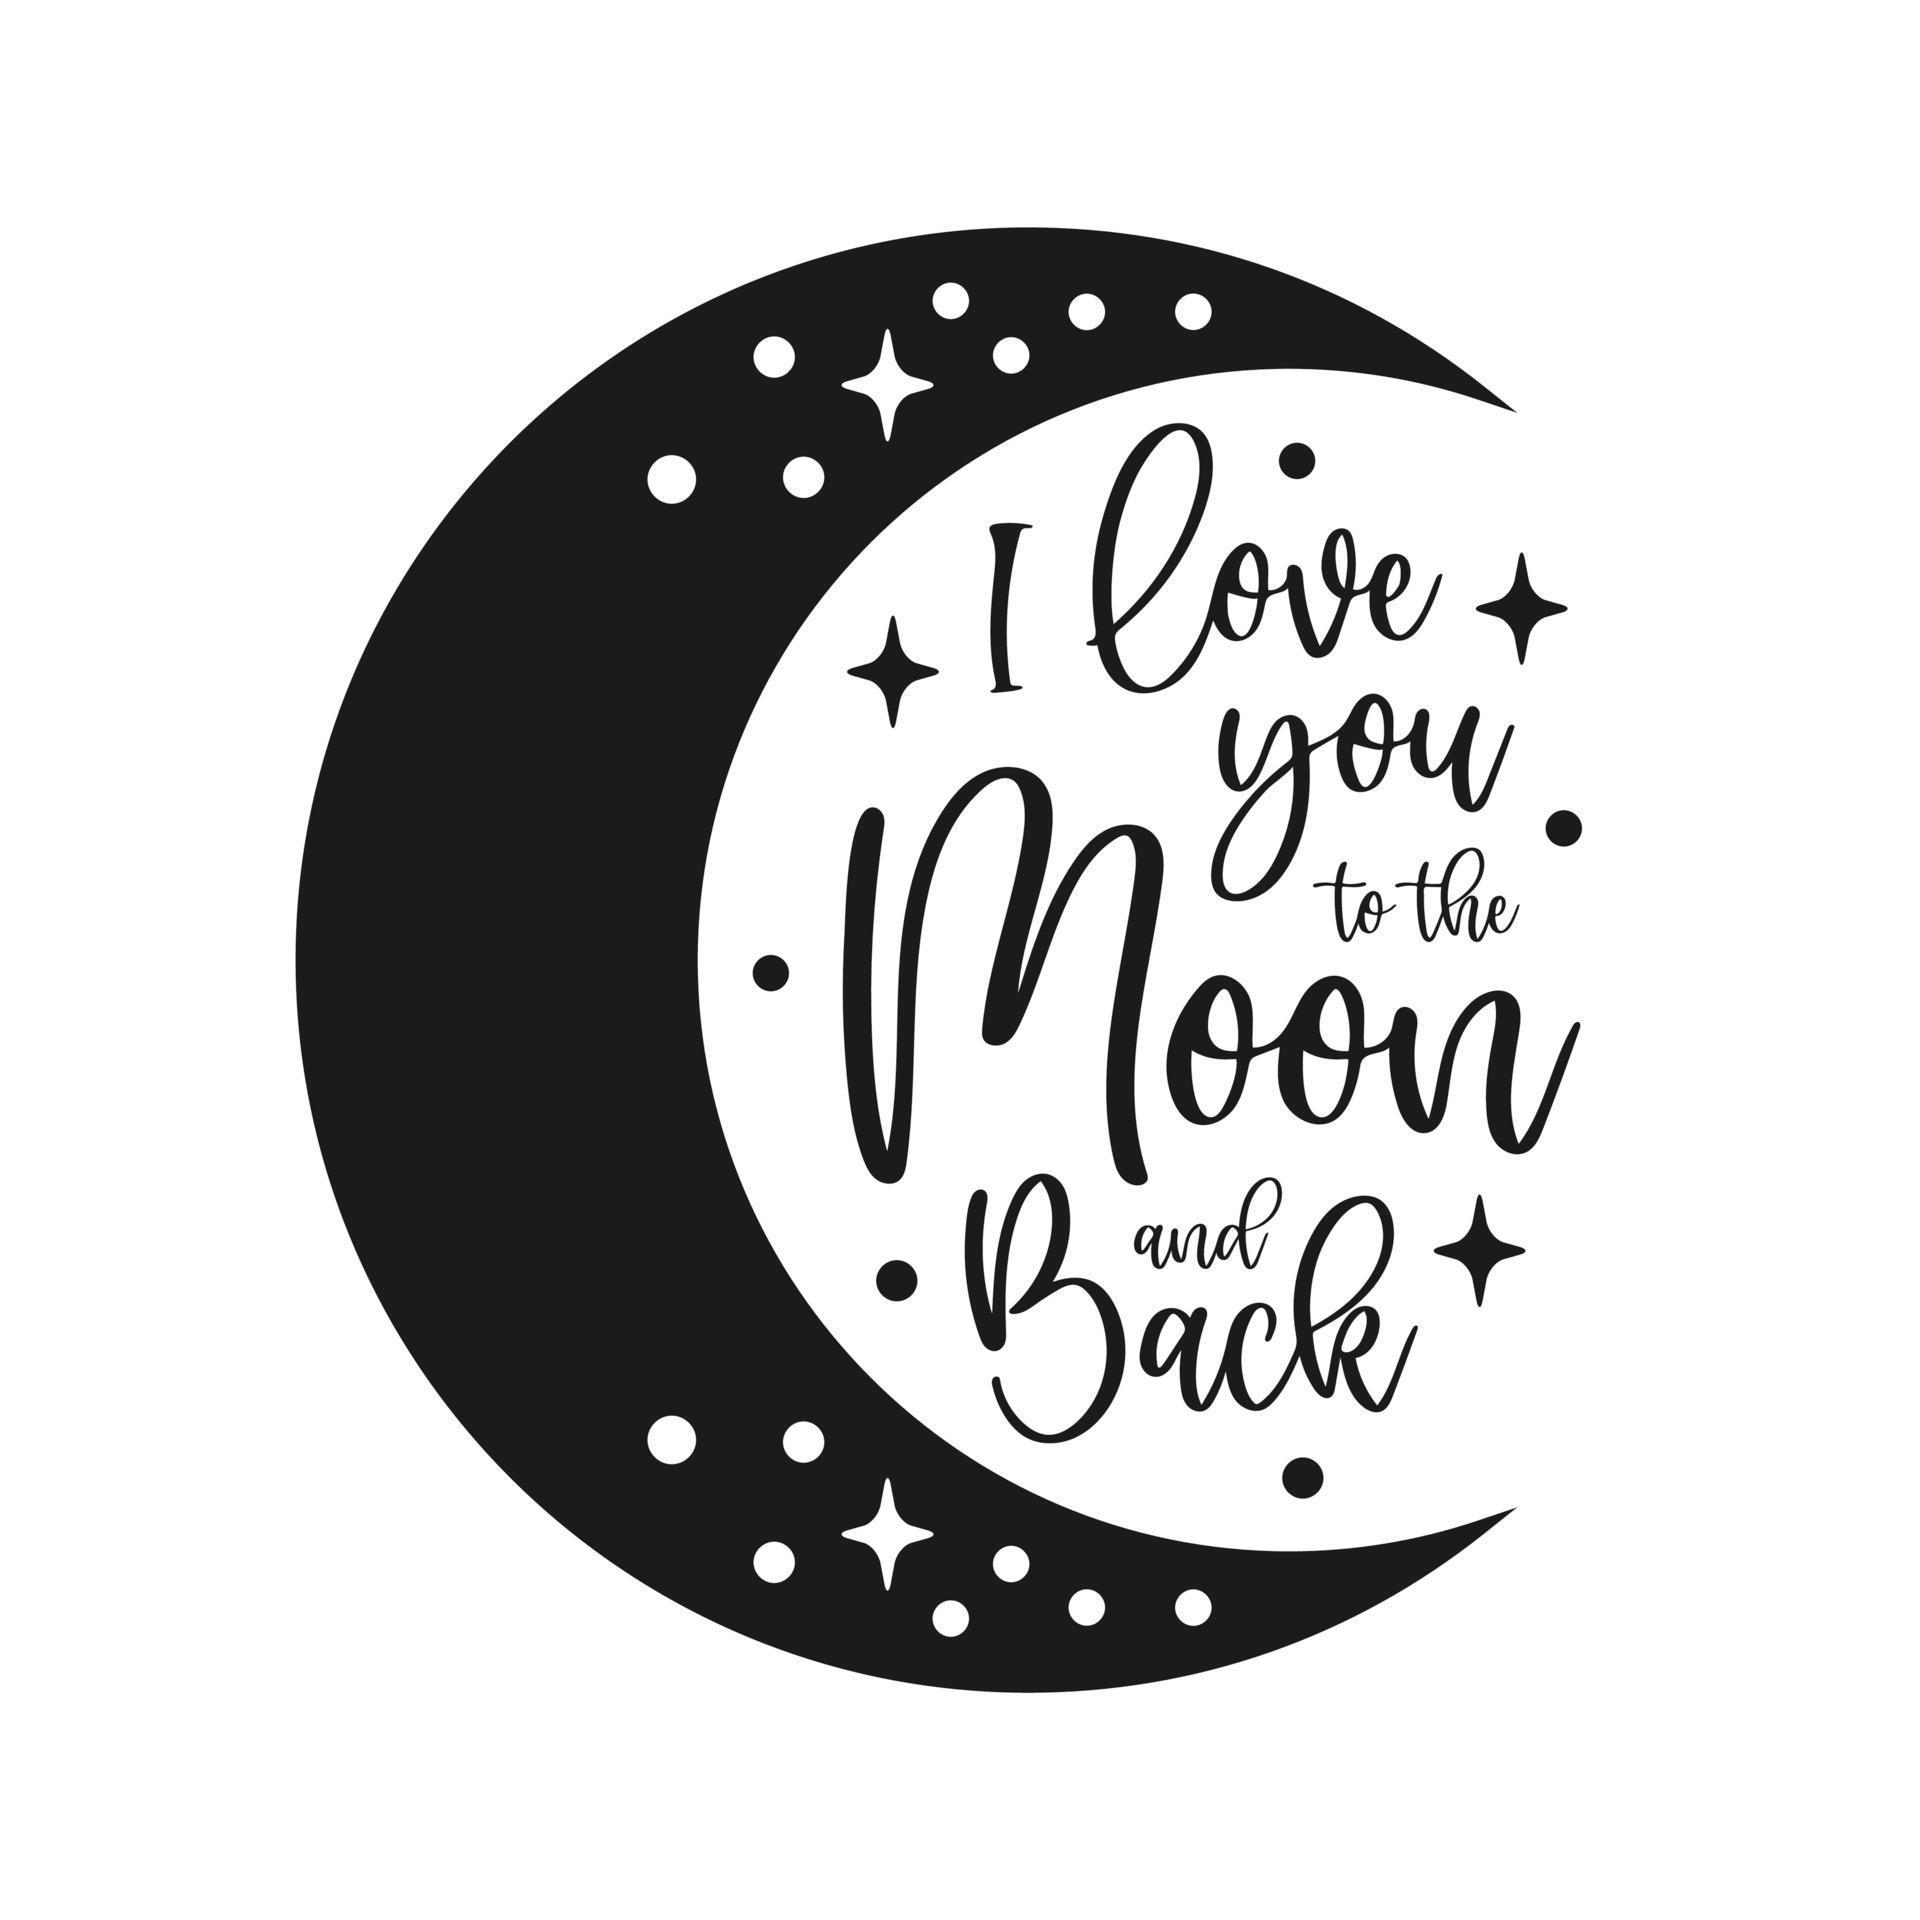 i-love-you-to-the-moon-and-back-love-quote-2291093-vector-art-at-vecteezy